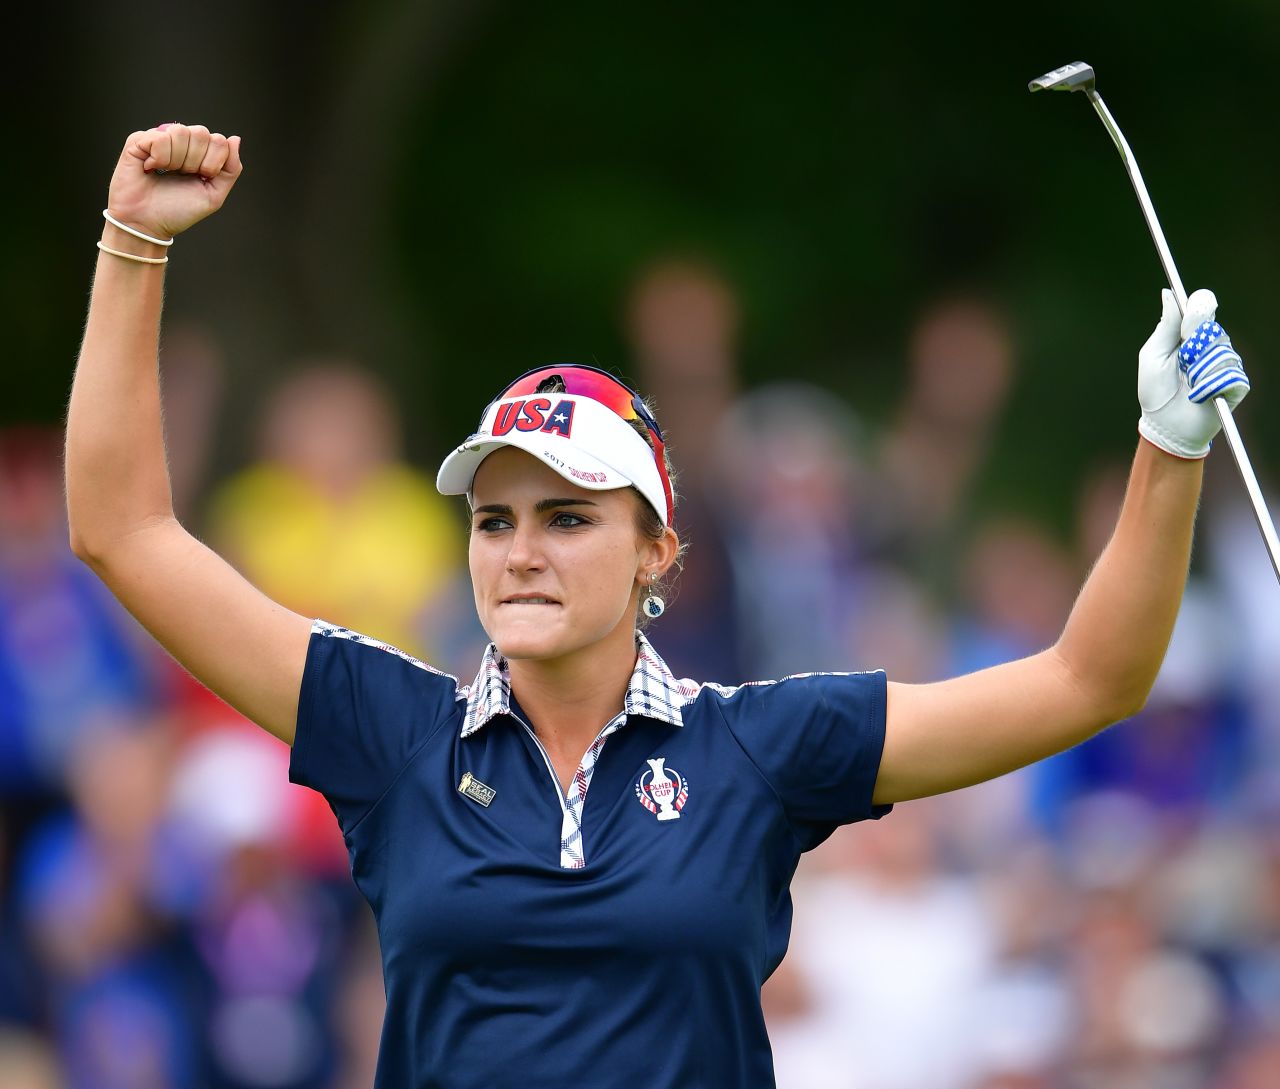 USA's Lexi Thompson said she had the 'weirdest round' of her career after the world No. 2 shot two-over-par on the front nine, before a stunning turnaround saw her register eight-under-par on the back nine.